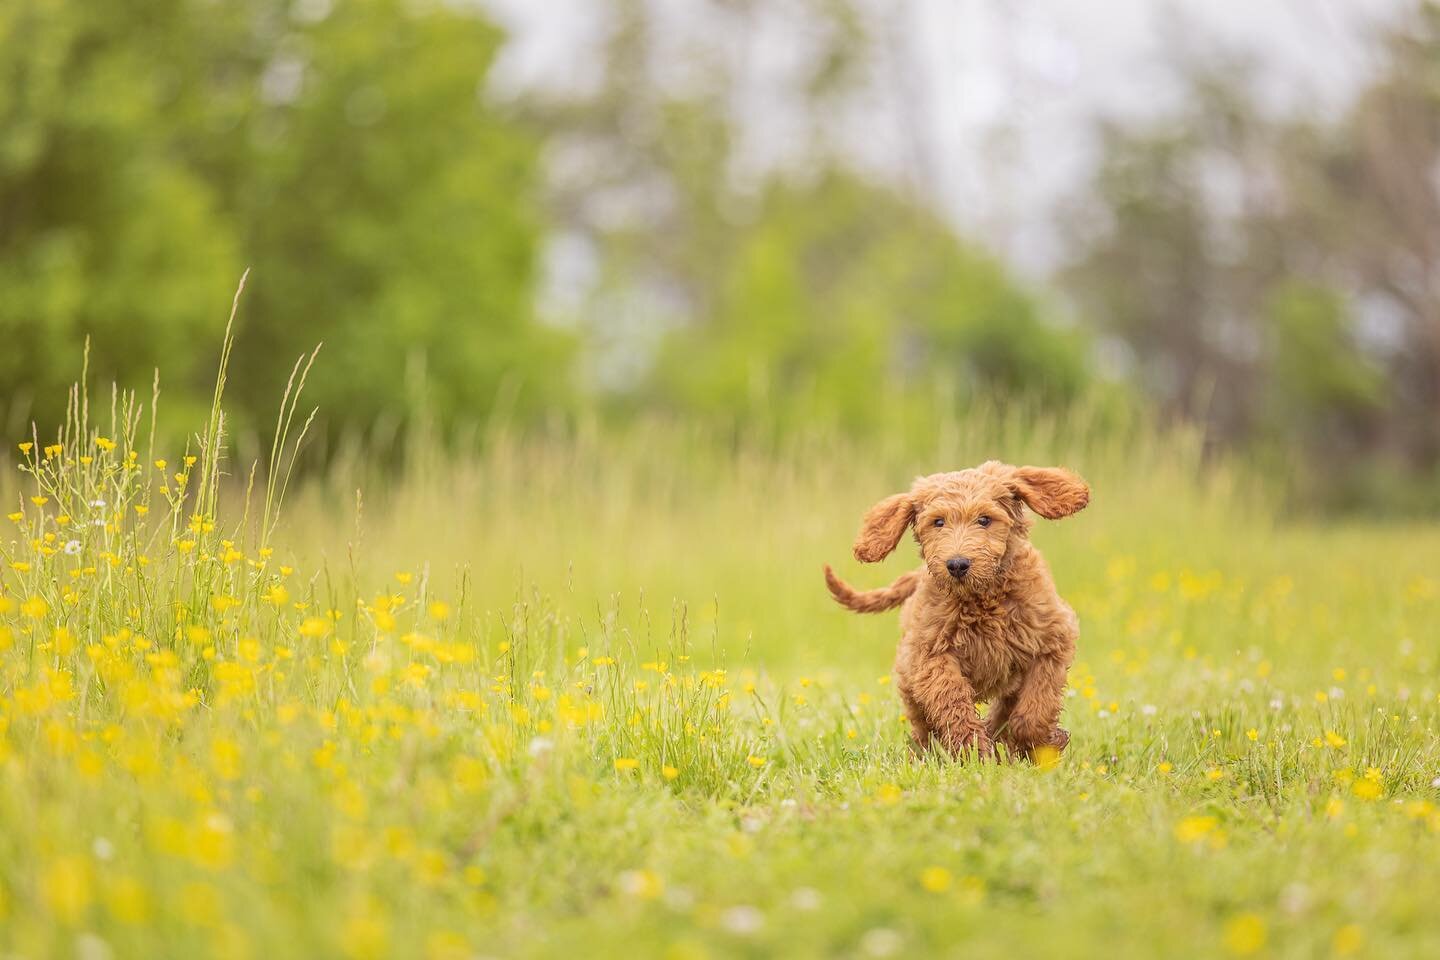 Life is pretty good when you're a puppy, frolicking through a field of buttercups. 🌼